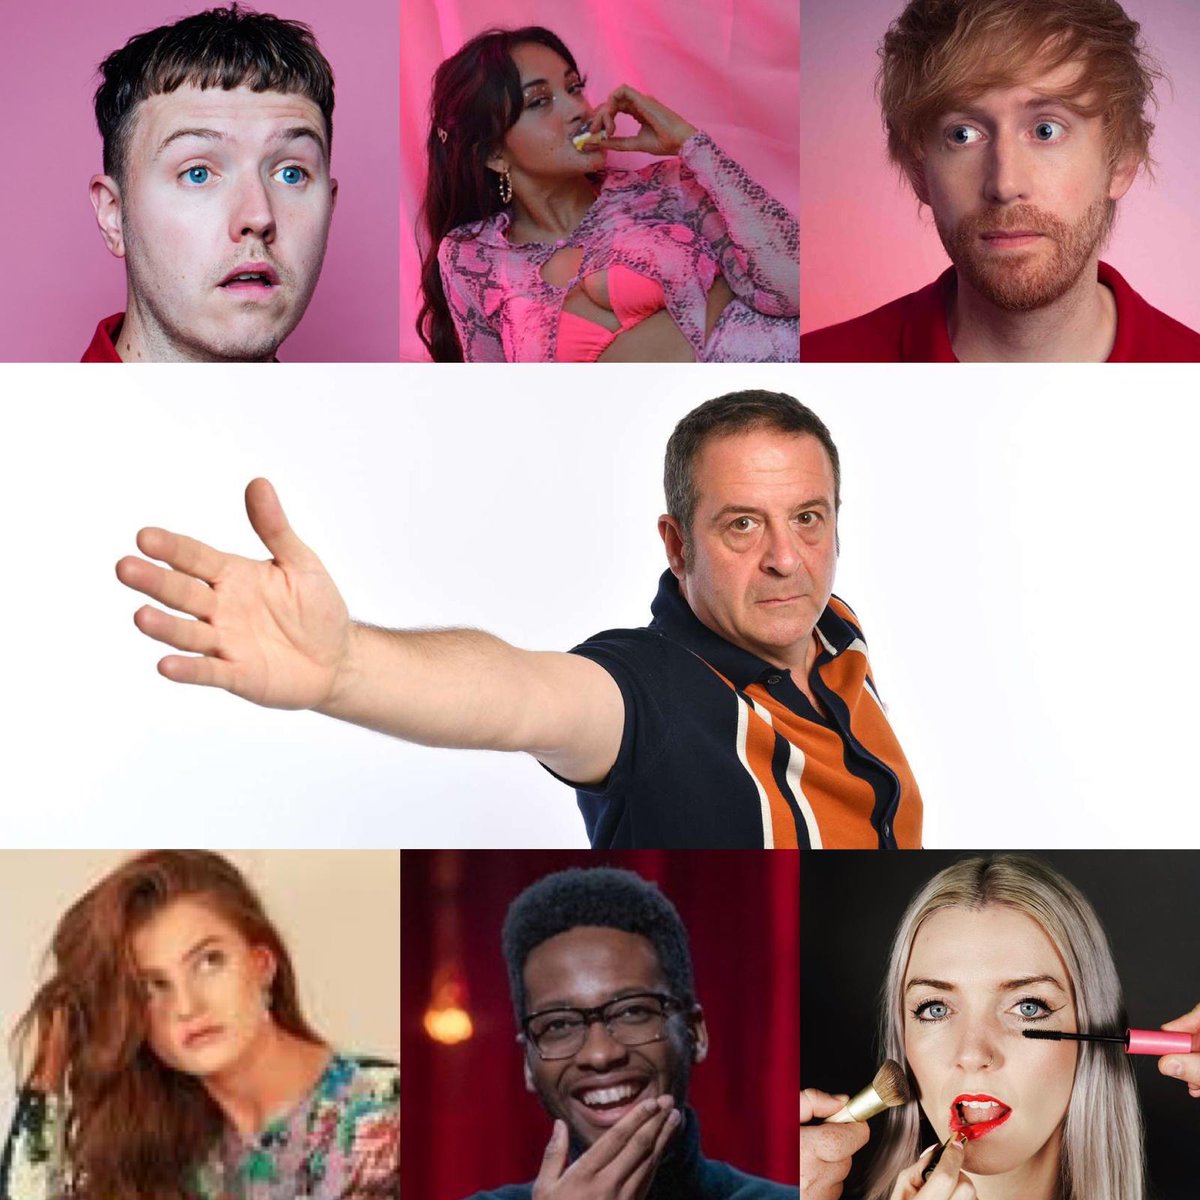 Final two acts for our gig this Thursday. The brilliant @JokesWithMark & hilarious @FreyaMallard are joining @markthomasinfo, @floodhaha, @SarahRoberts___, @tadiwamahlunge & @MissAHaddow. Get tickets from below. They are selling fast.. designmynight.com/london/whats-o…